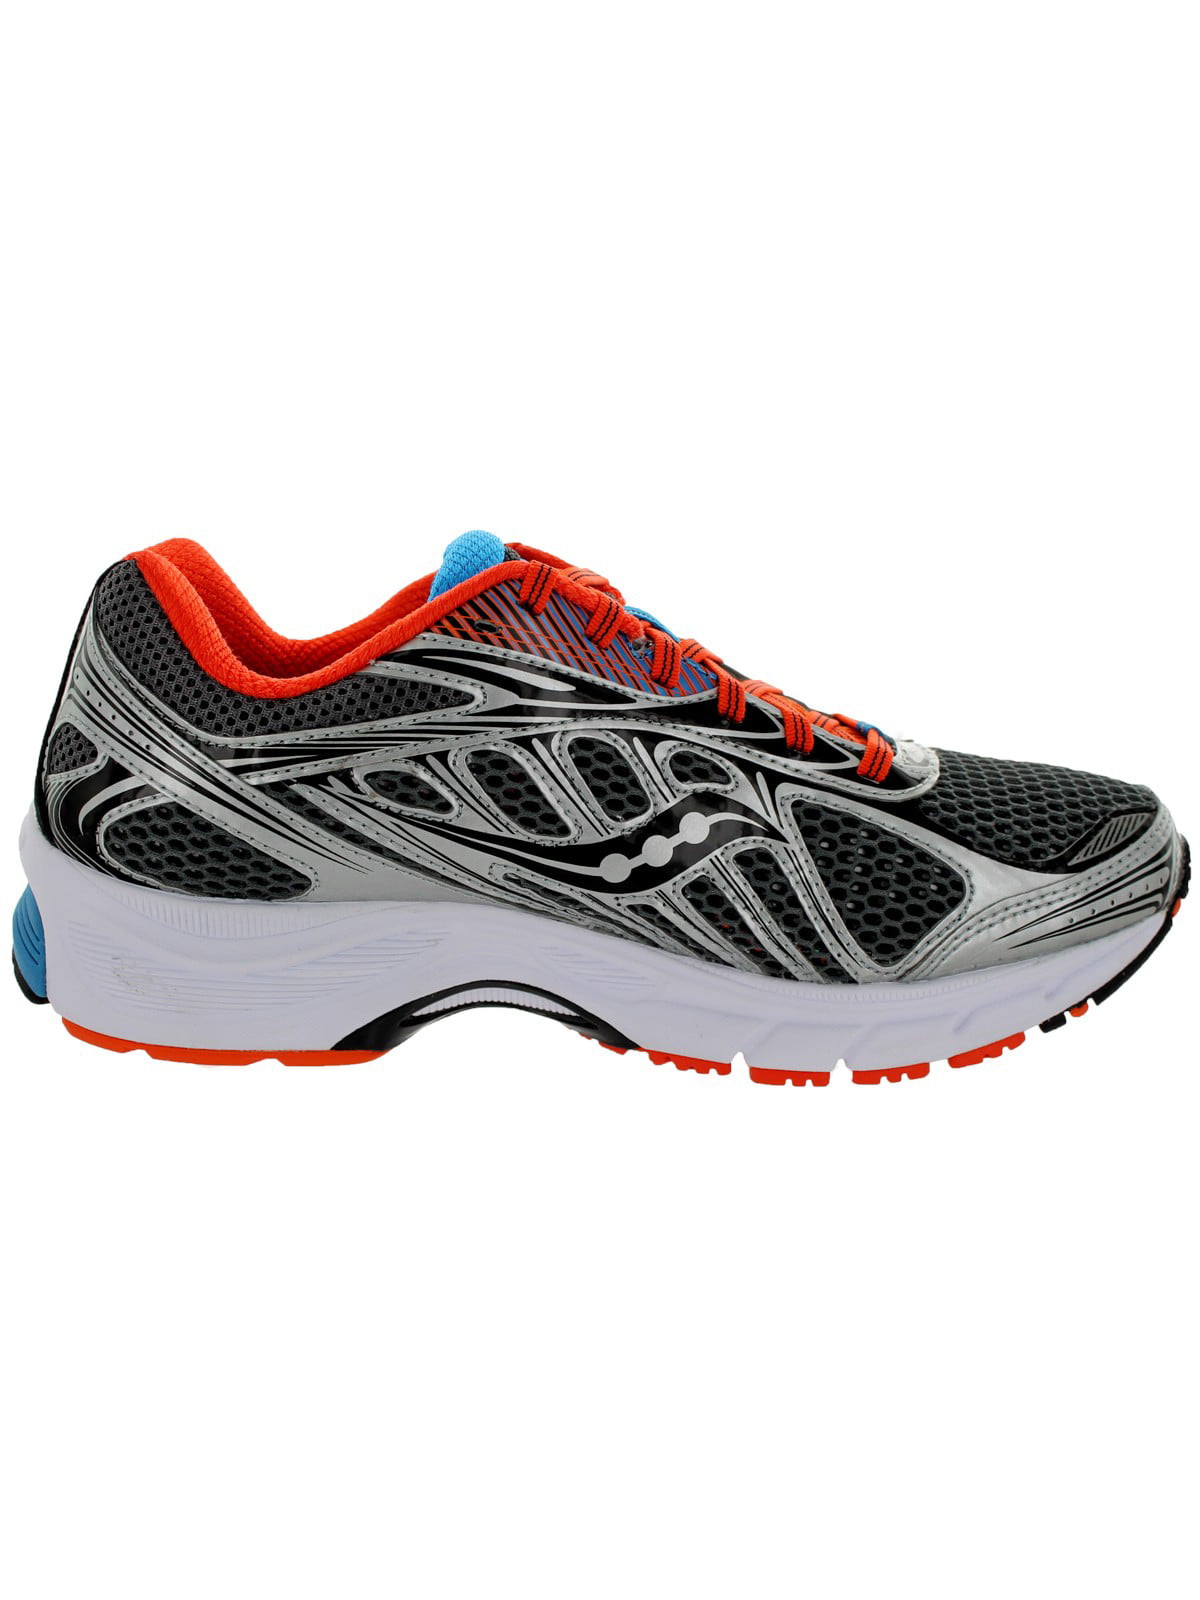 saucony powergrid ride 6 running shoes mens